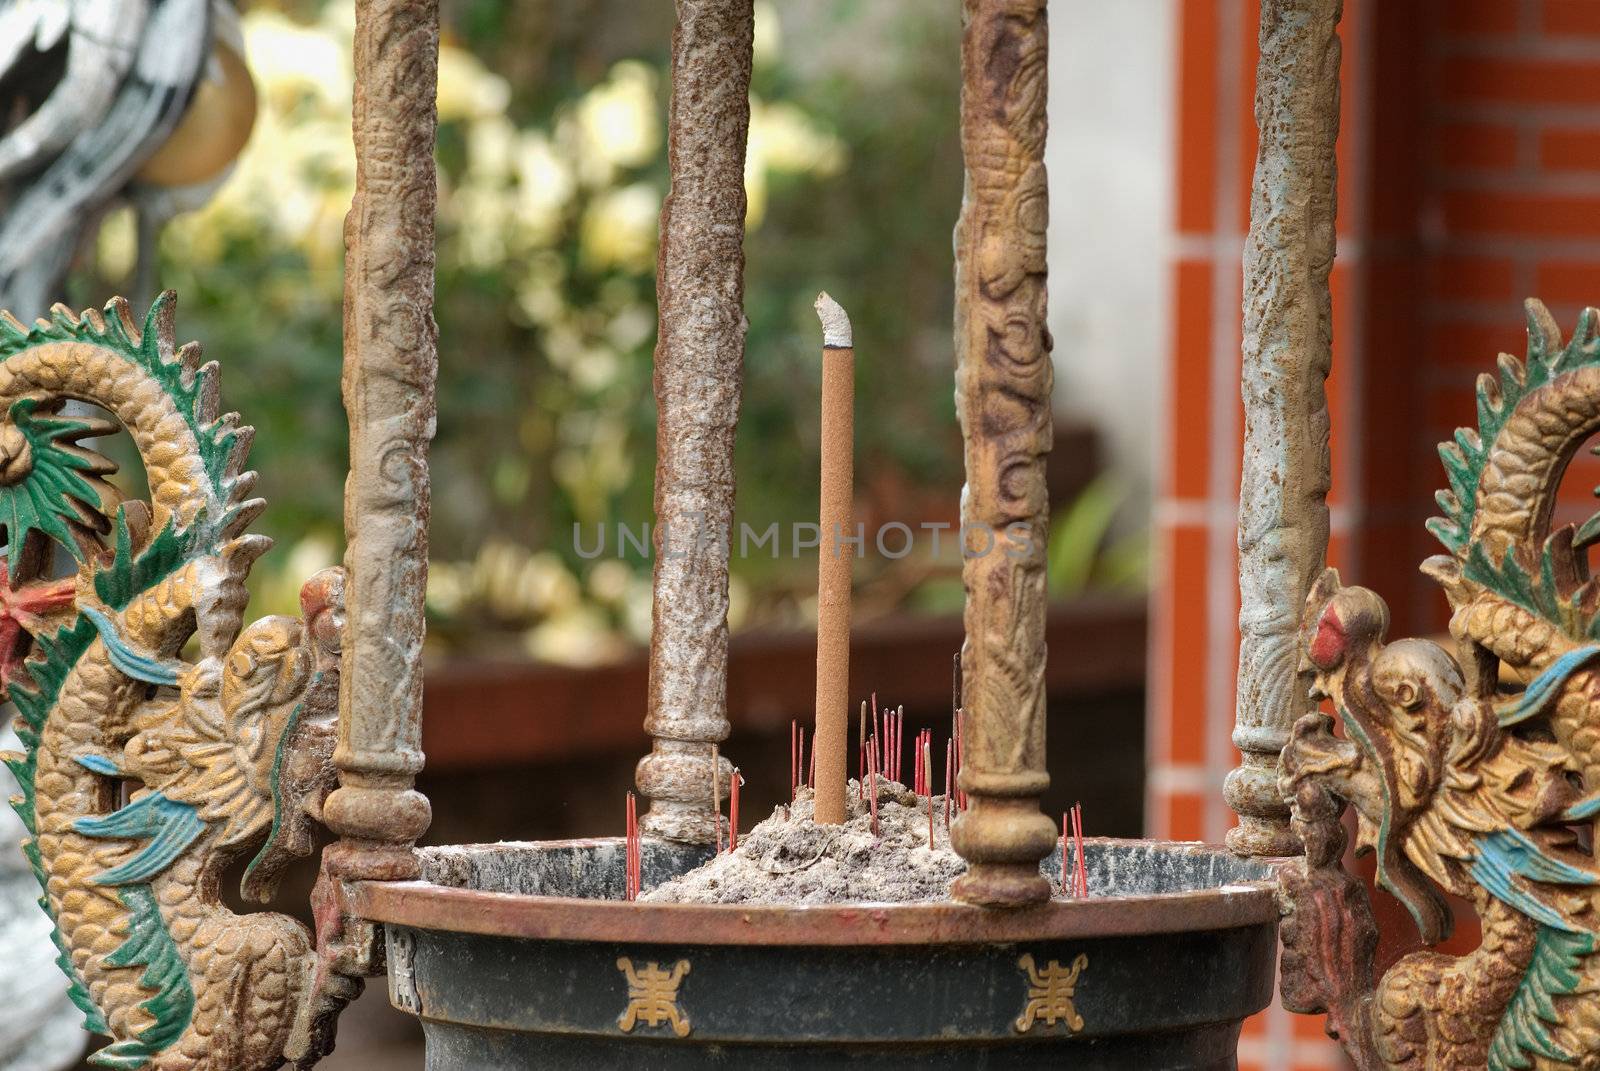 This is a taiwan custom censer, to input joss stick and pray safe and peace.